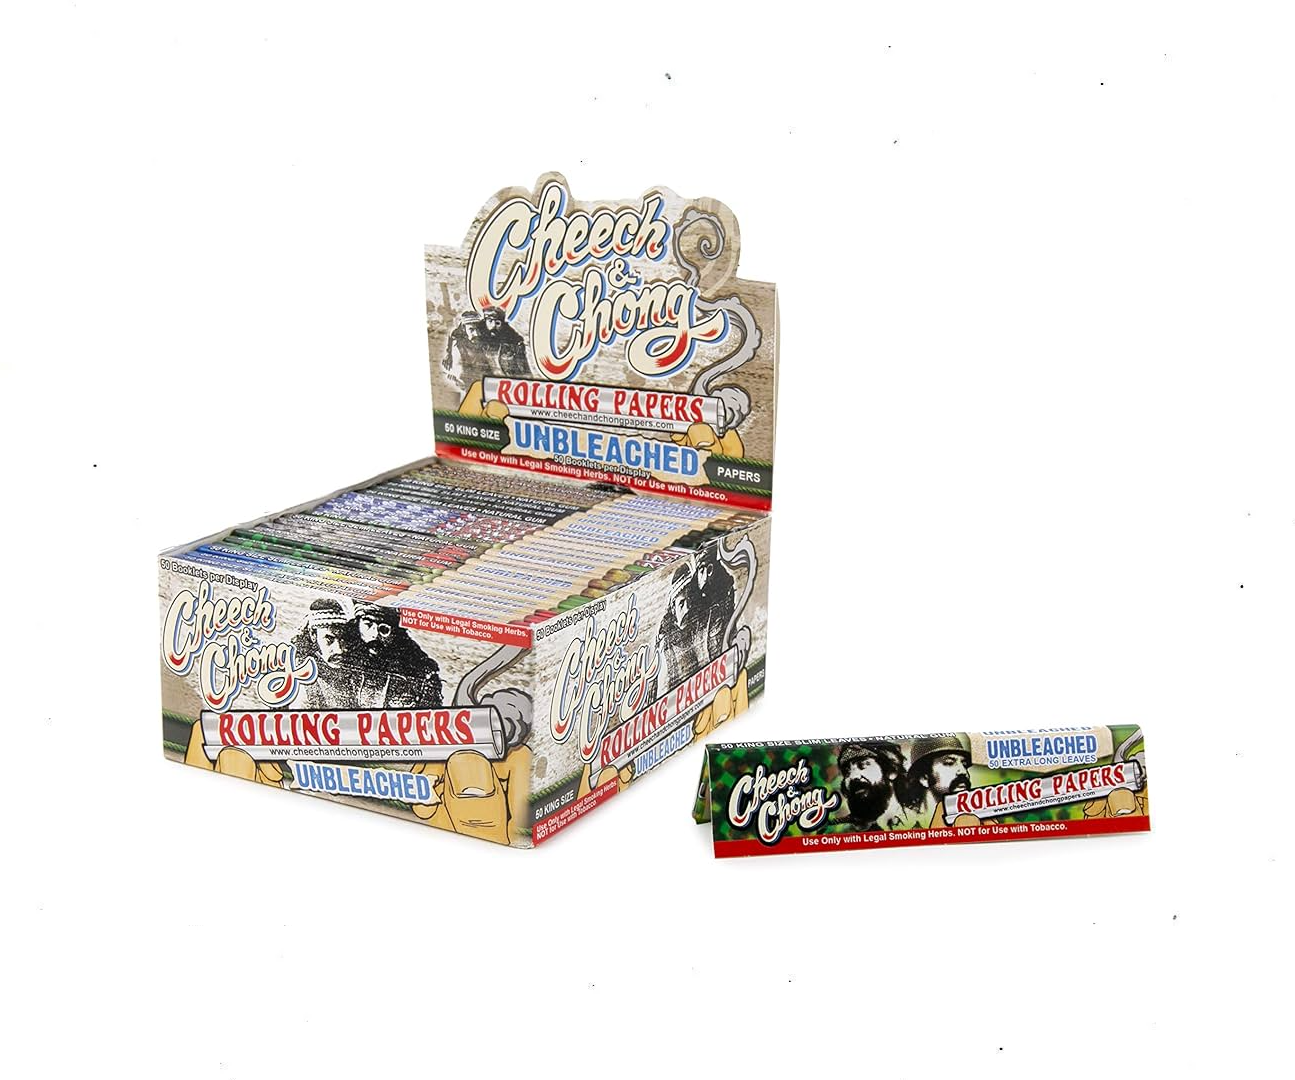 Cheech and Chong - Unbleached Rolling Papers (King Size)